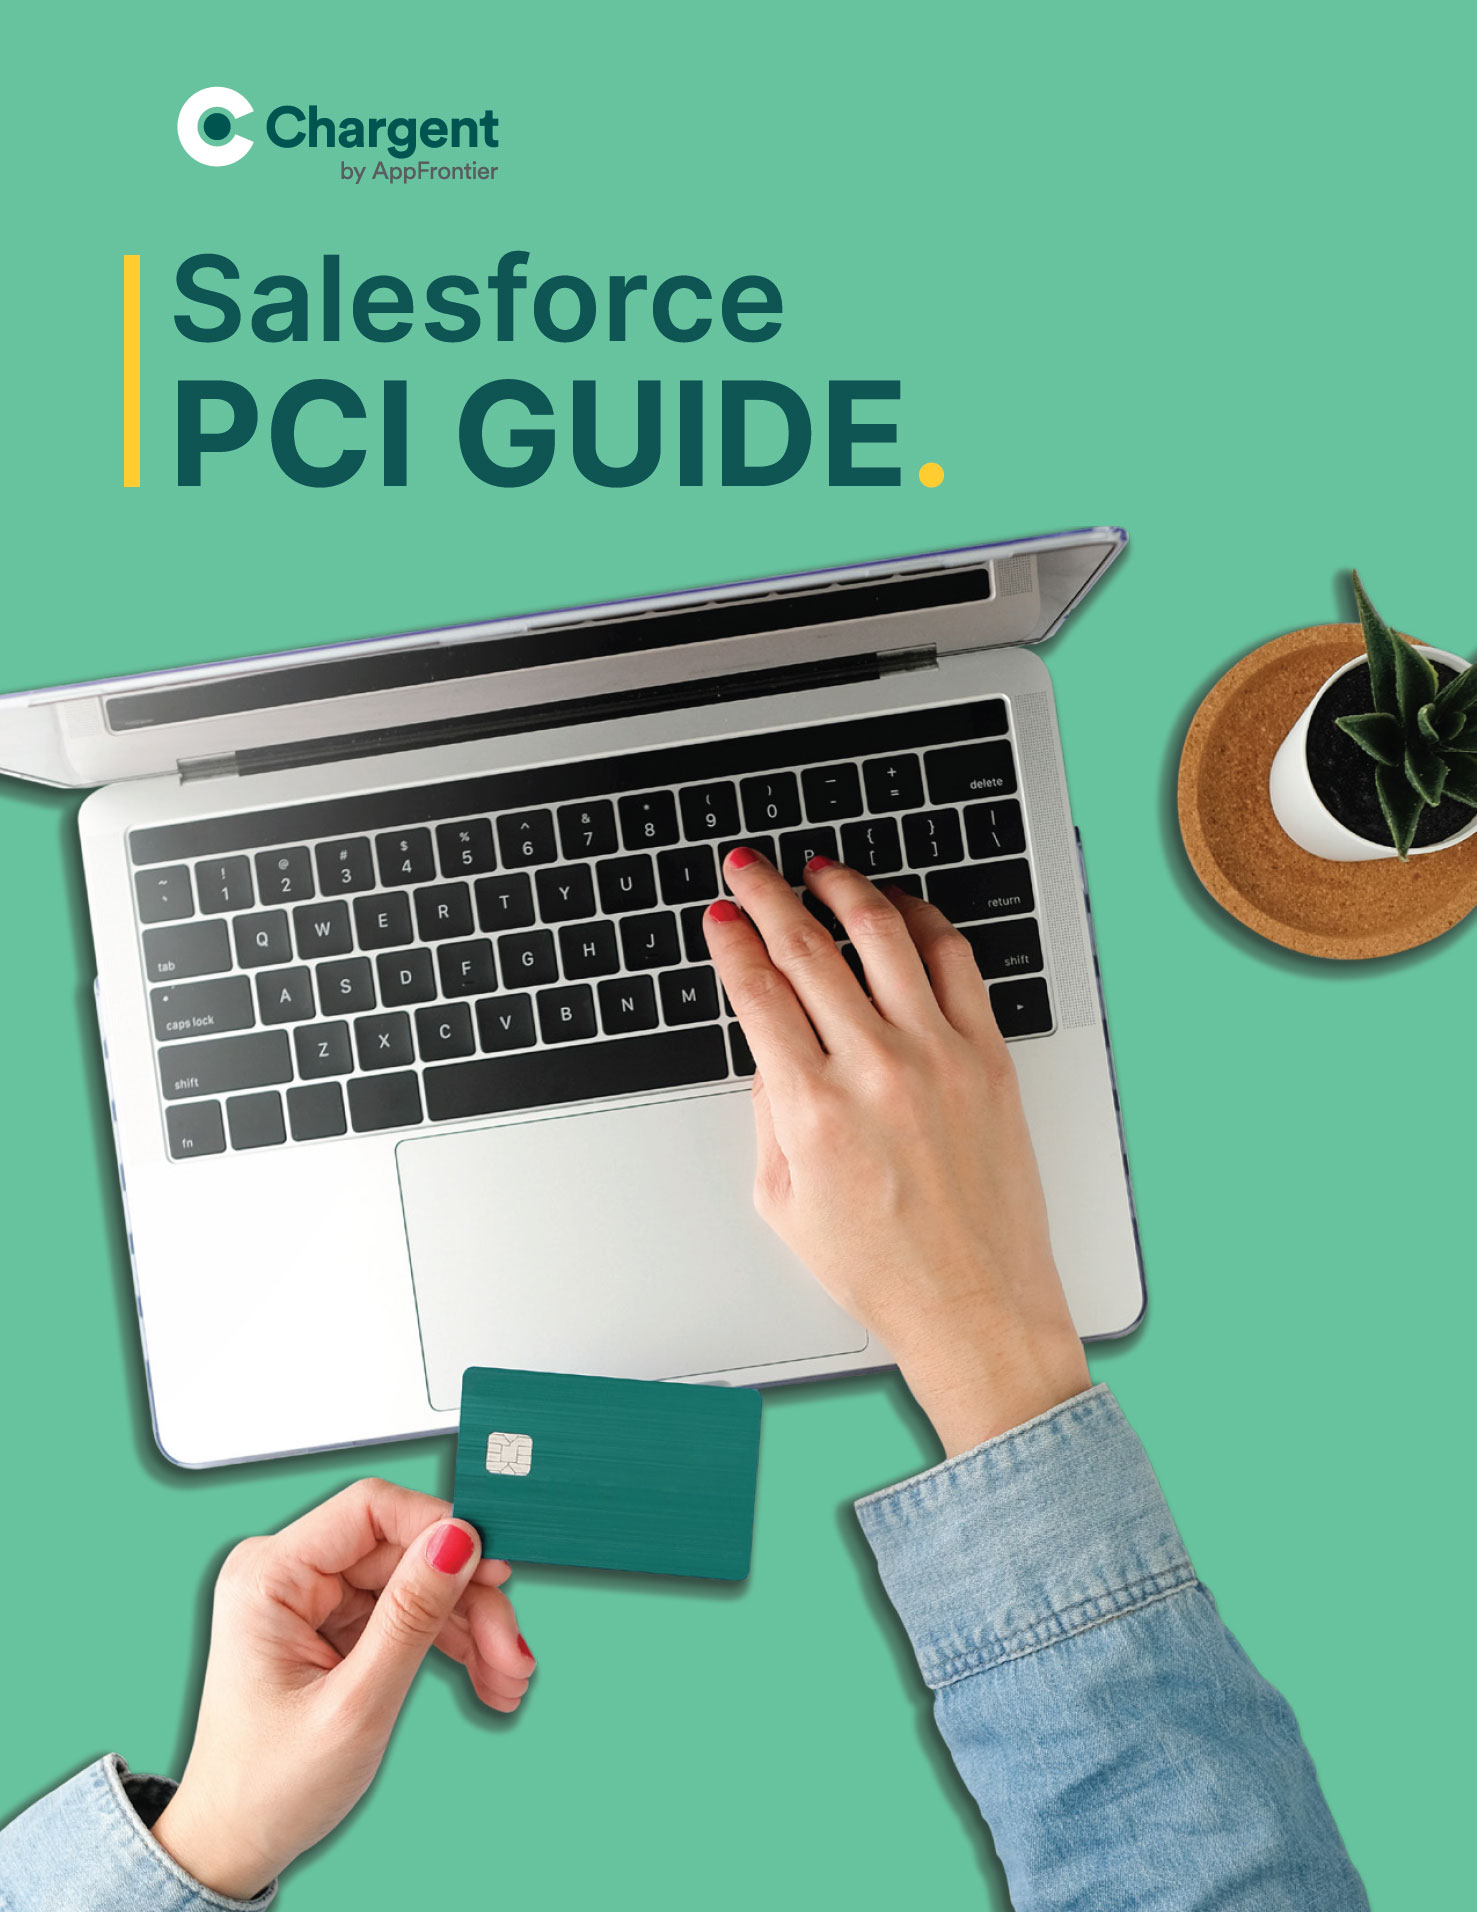 Salesforce PCI Guide from Chargent